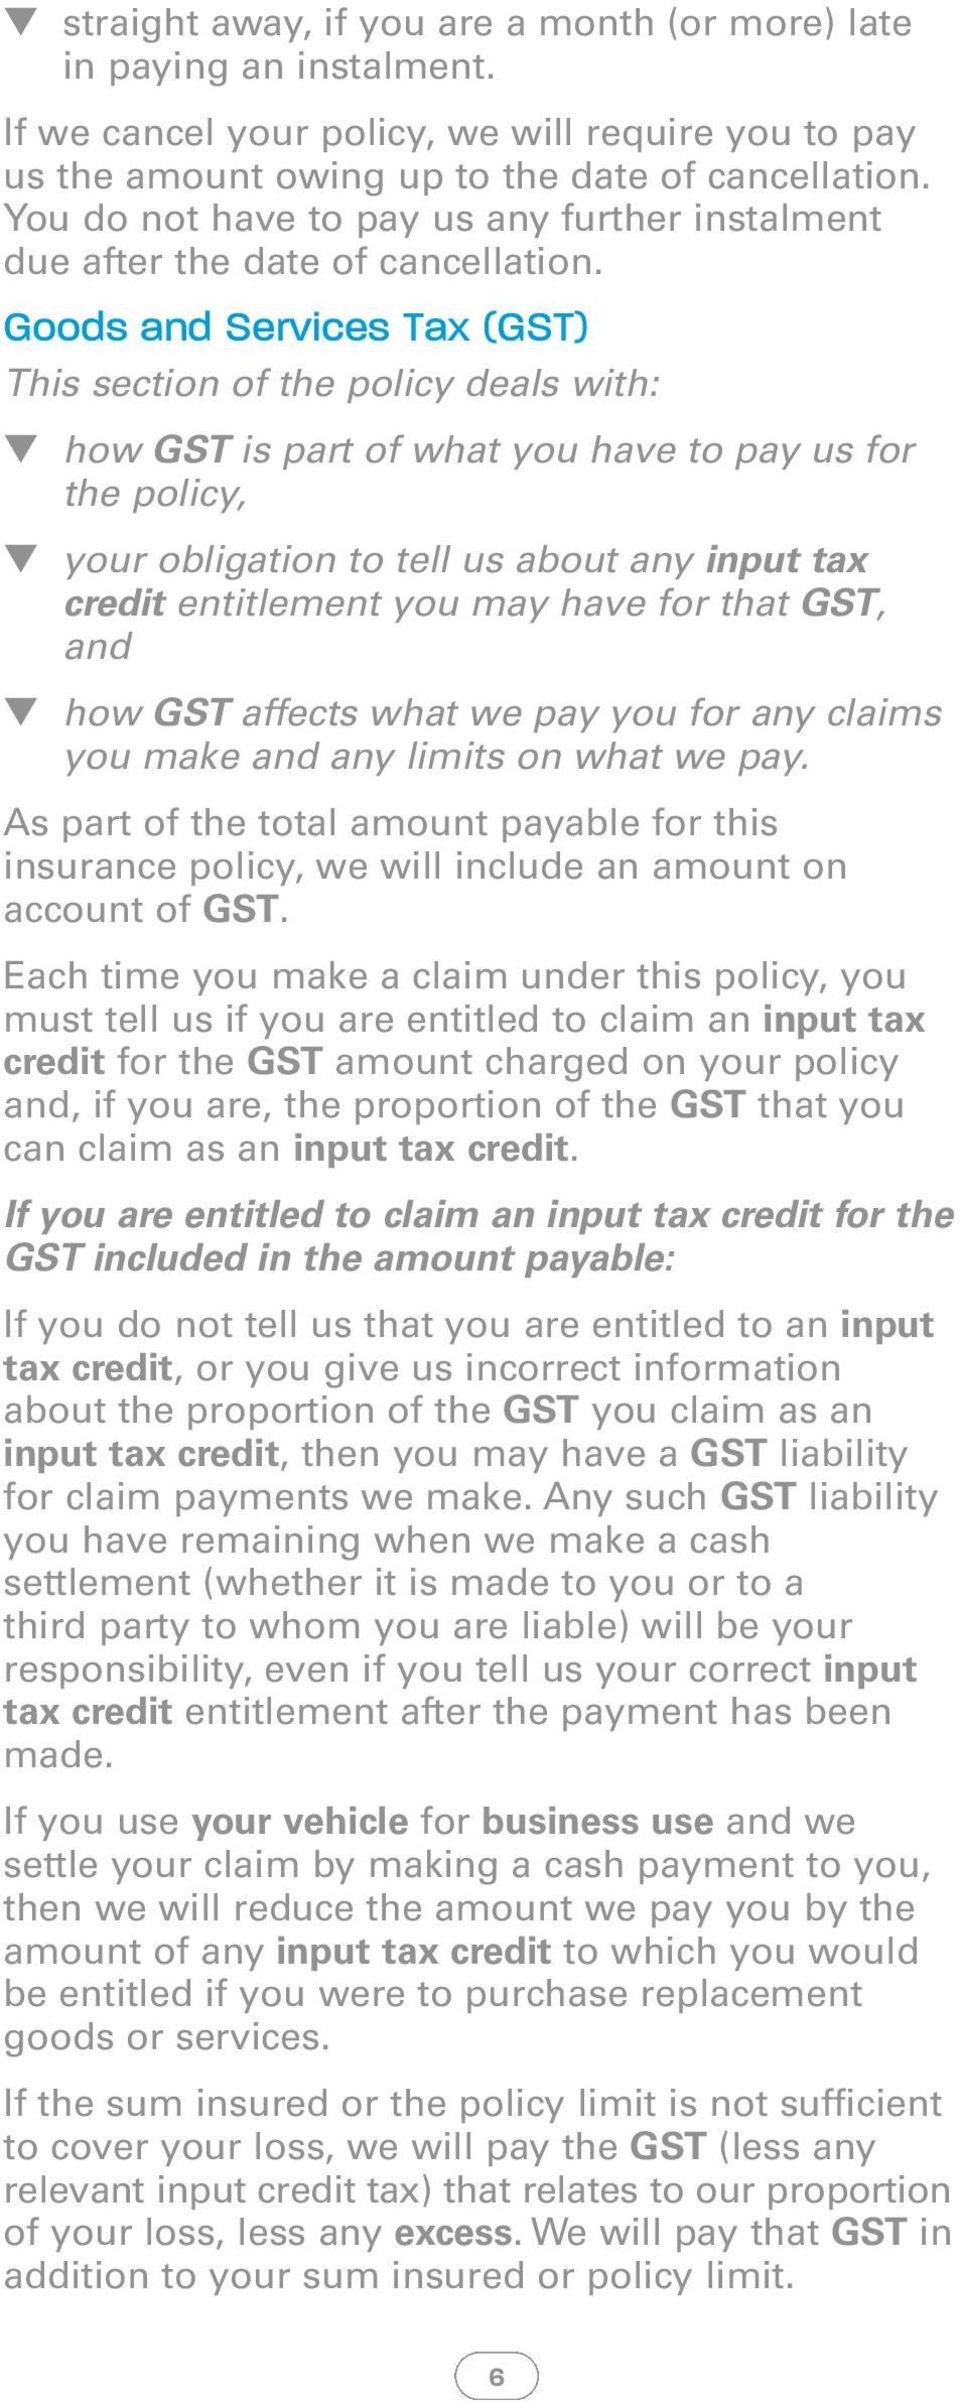 Goods and Services Tax (GST) This section of the policy deals with: how GST is part of what you have to pay us for the policy, your obligation to tell us about any input tax credit entitlement you